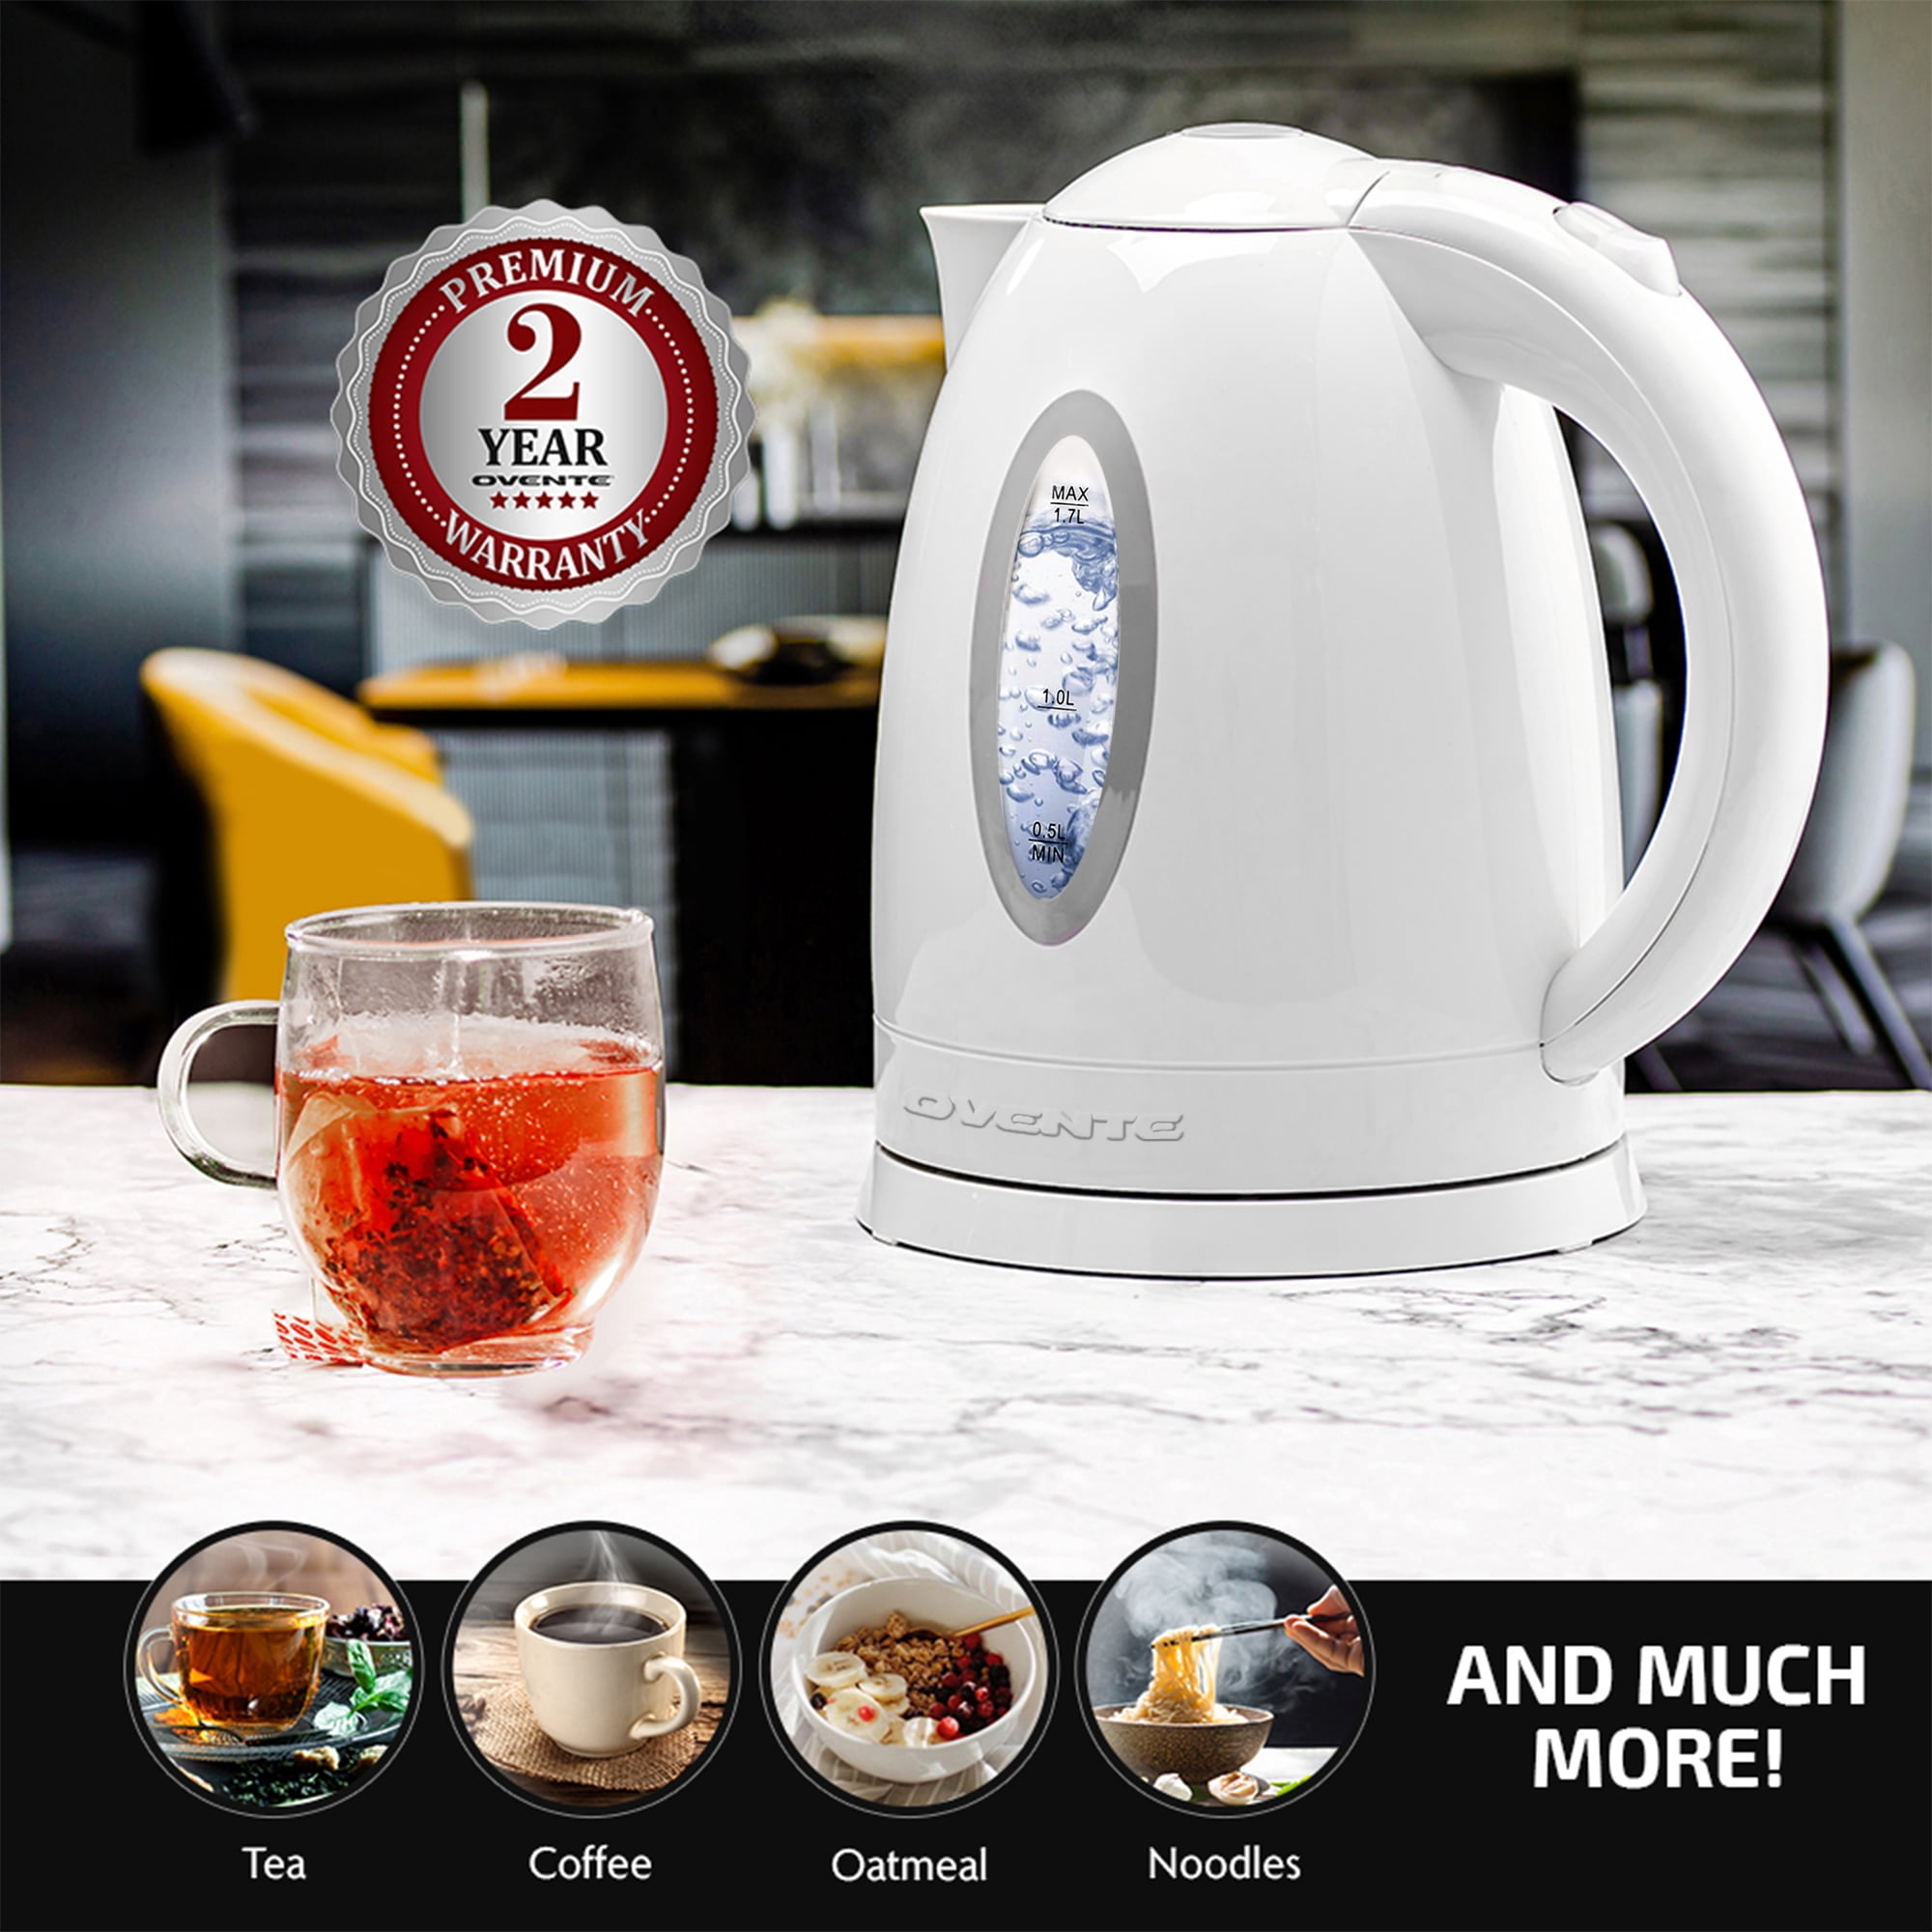 Auto Shutoff Function and Boil Dry Protection KP72W White Ovente Electric Kettle 1.7 Liter Water Boiler & Tea Heater with LED Indicator Light,1100 Watts Fast & Concealed Heating Element BPA-Free 